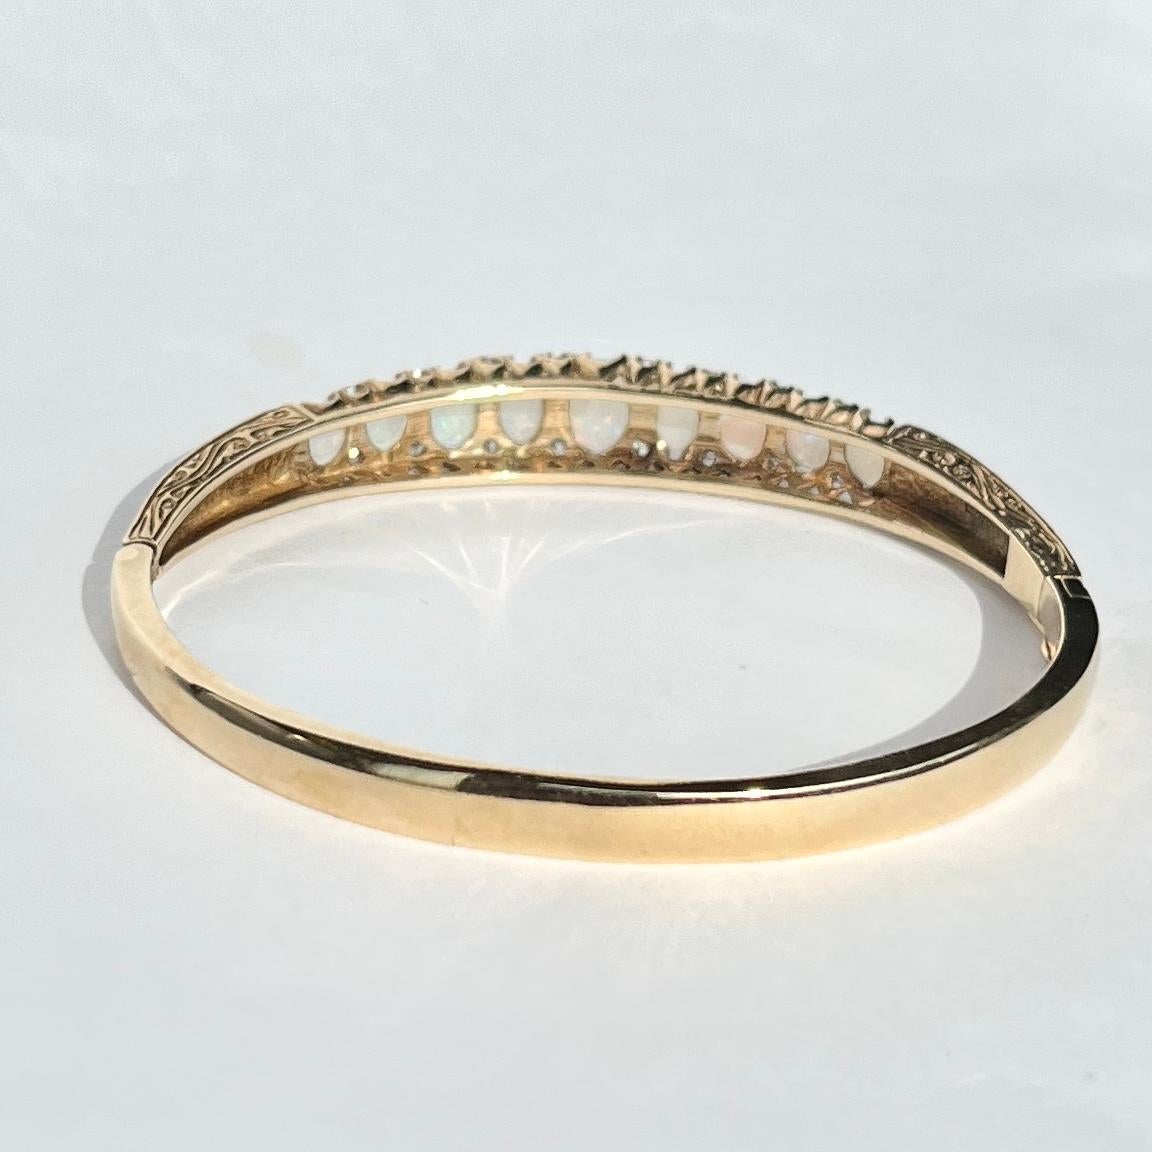 This bangle is modelled in 9carat gold and holds a total of 9 graduated opals. In between the bright and colourful opals there are sparkly diamond points. Fully hallmarked Sheffield 1991. 

Inner Diameter: 55mm
Bangle Width: 9mm

Weight: 18g